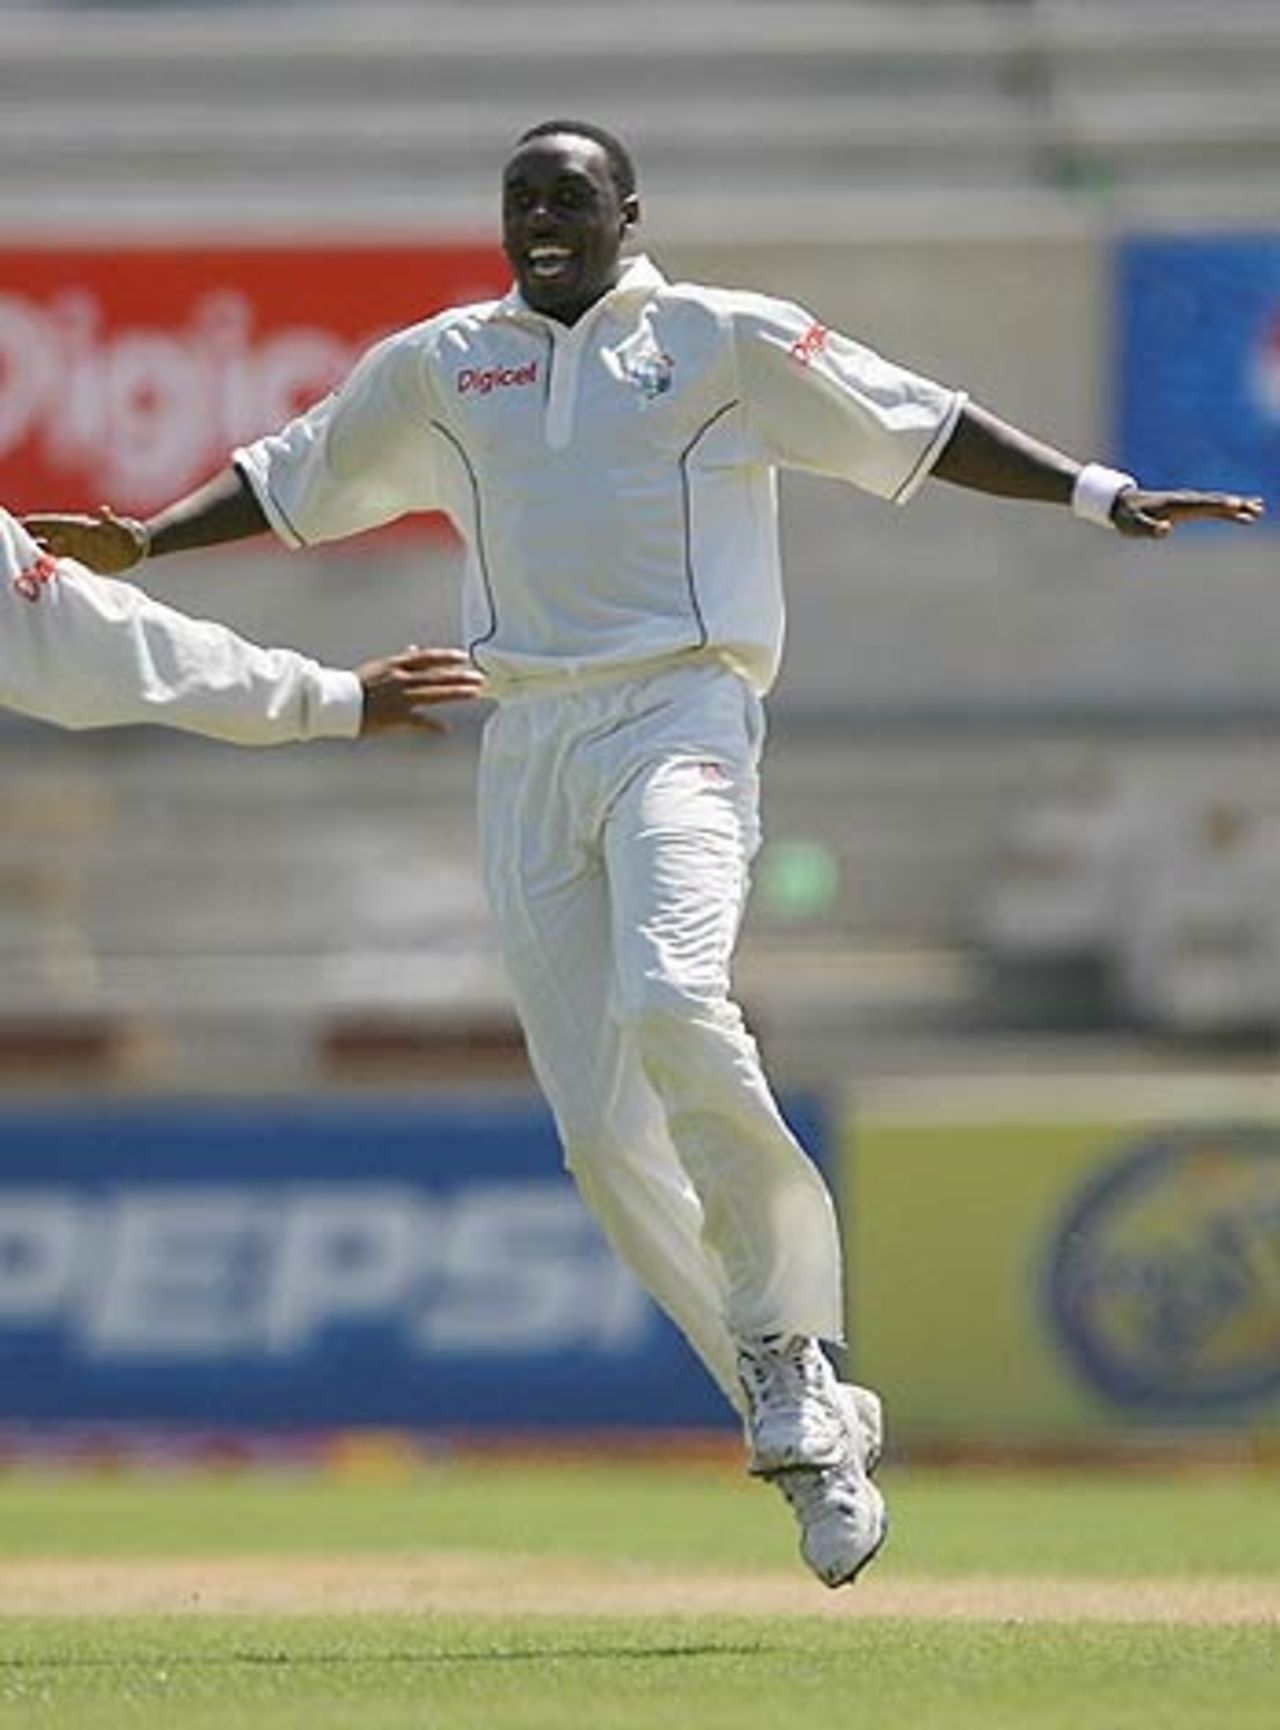 Pedro Collins is ecstatic after dismissing Virender Sehwag, West Indies v India, 4th Test, Jamaica, 1st day, June 30, 2006